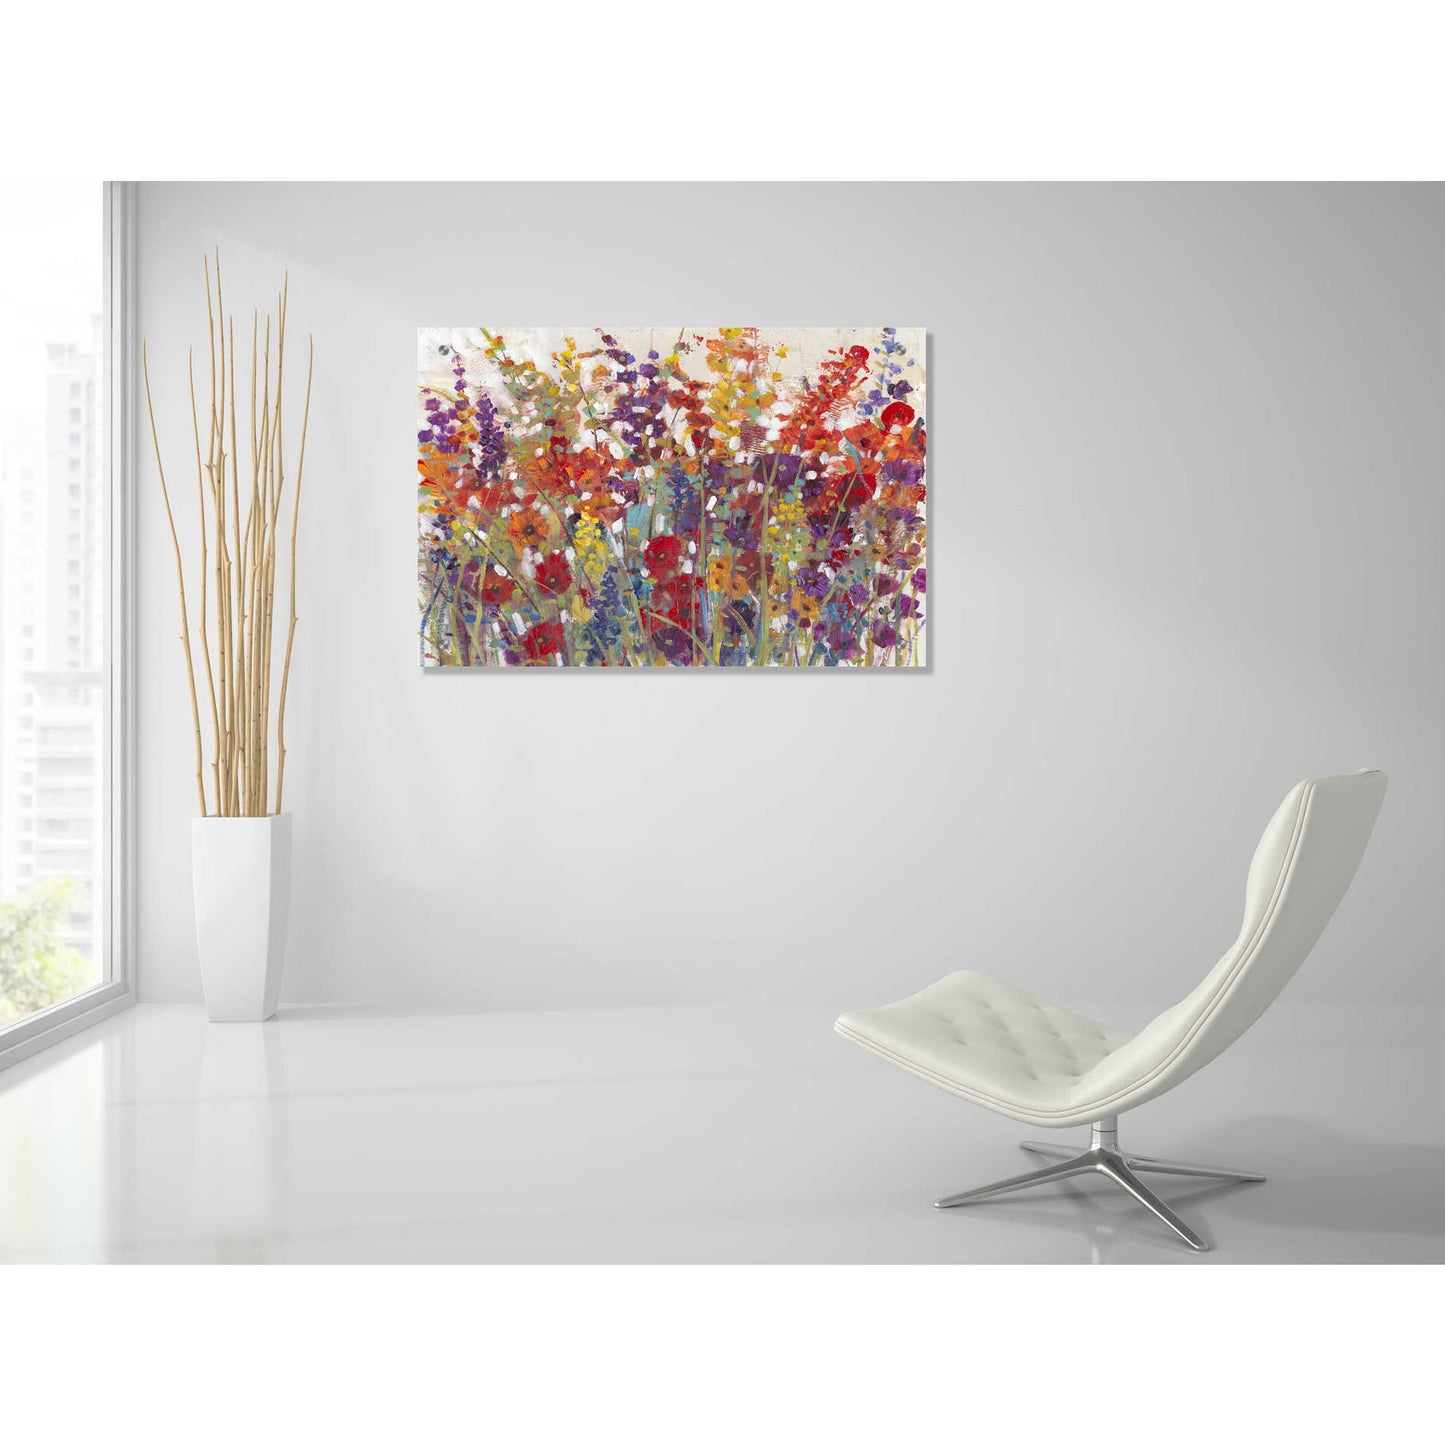 Epic Art 'Variety of Flowers II' by Tim O'Toole, Acrylic Glass Wall Art,36x24